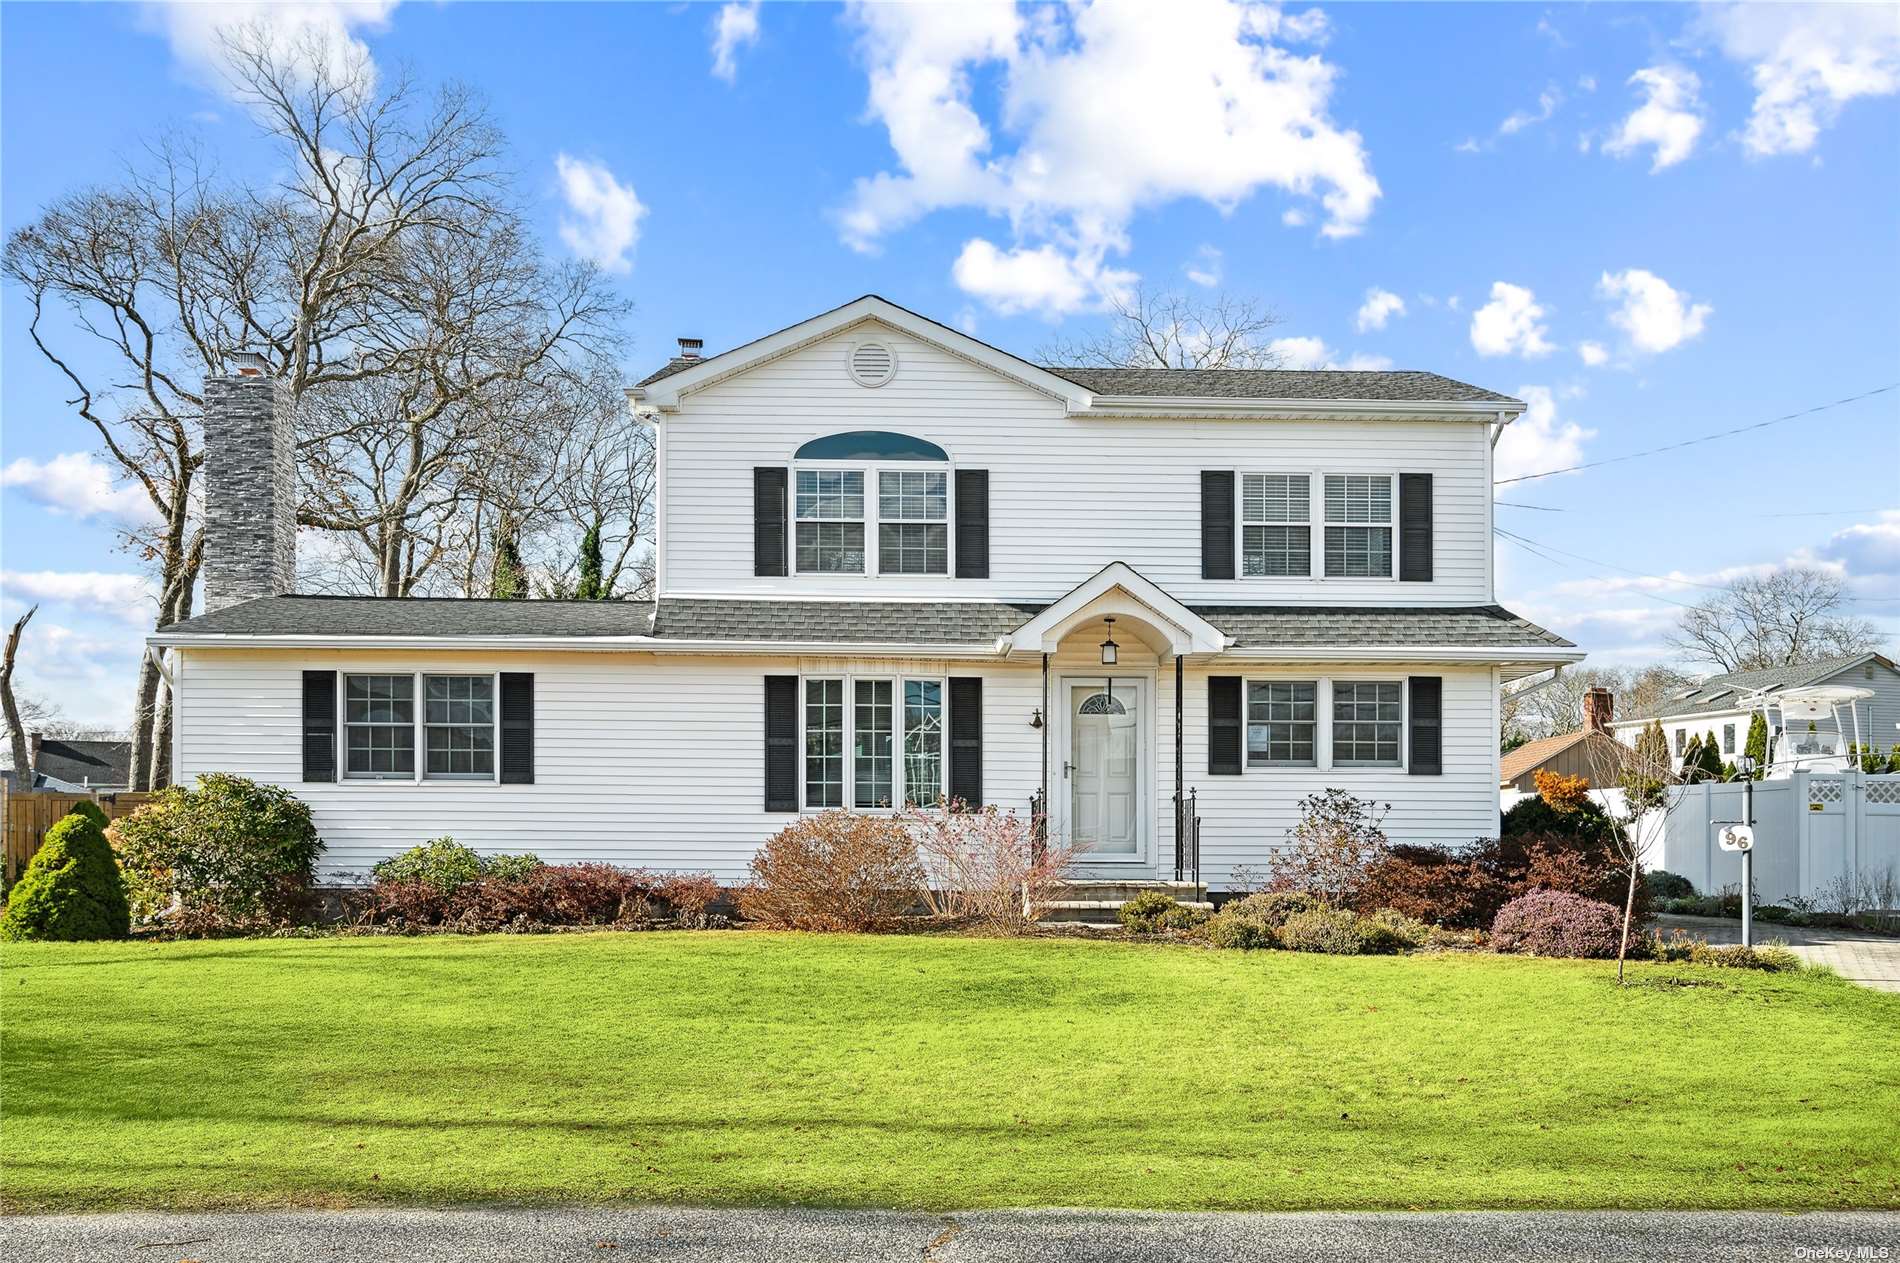 Single Family in Center Moriches - Hewitt  Suffolk, NY 11934